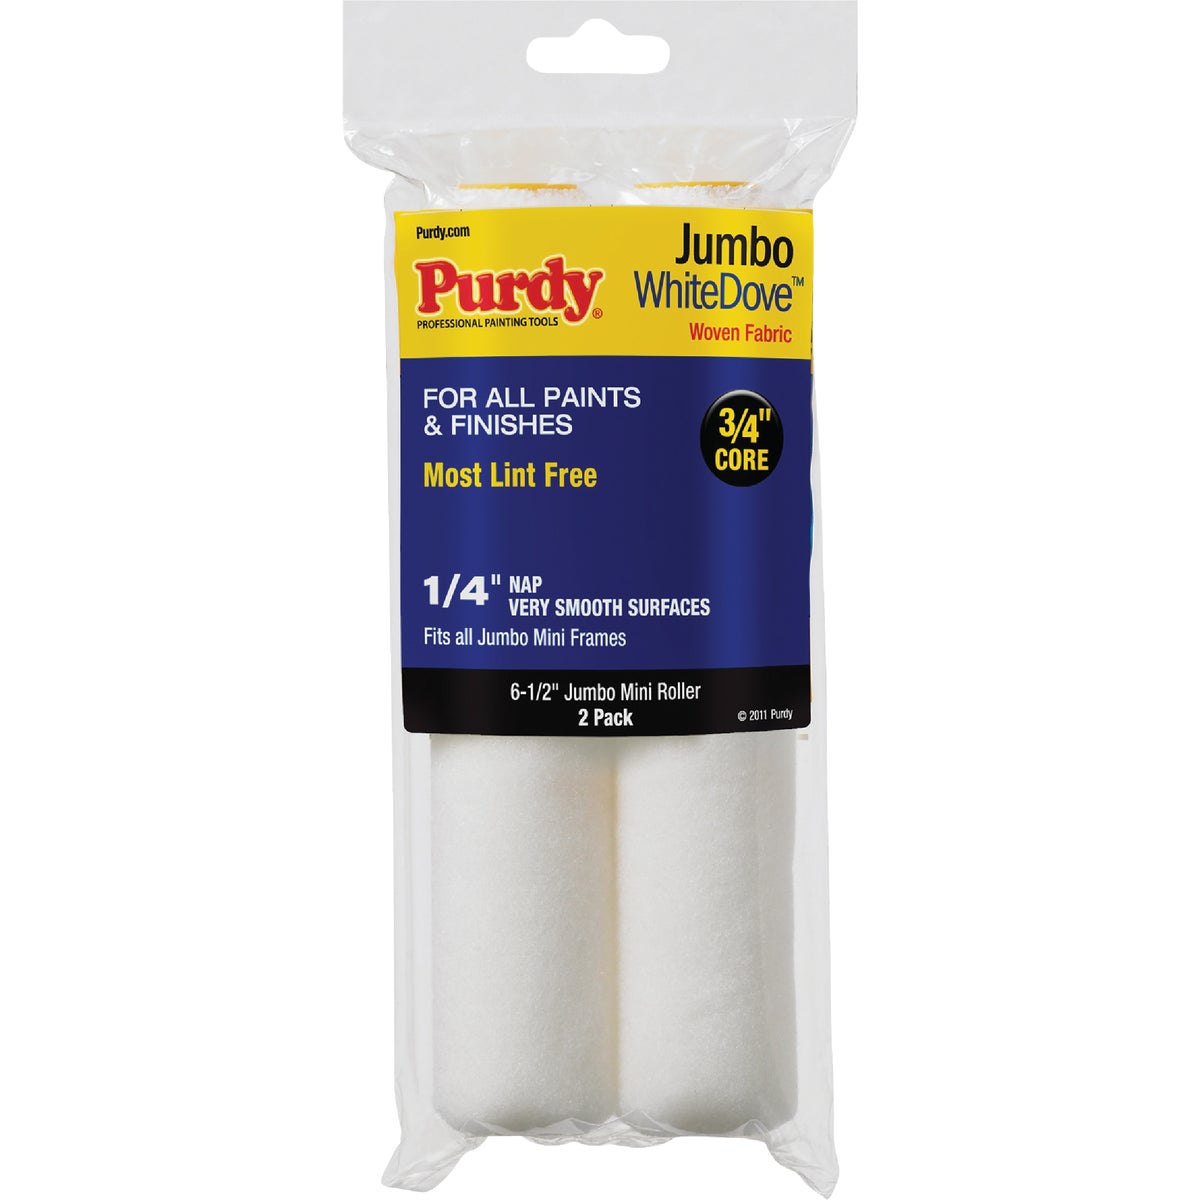 Purdy White Dove 6-1/2 In. x 1/4 In. Jumbo Mini Woven Fabric Roller Cover (2-Pack)